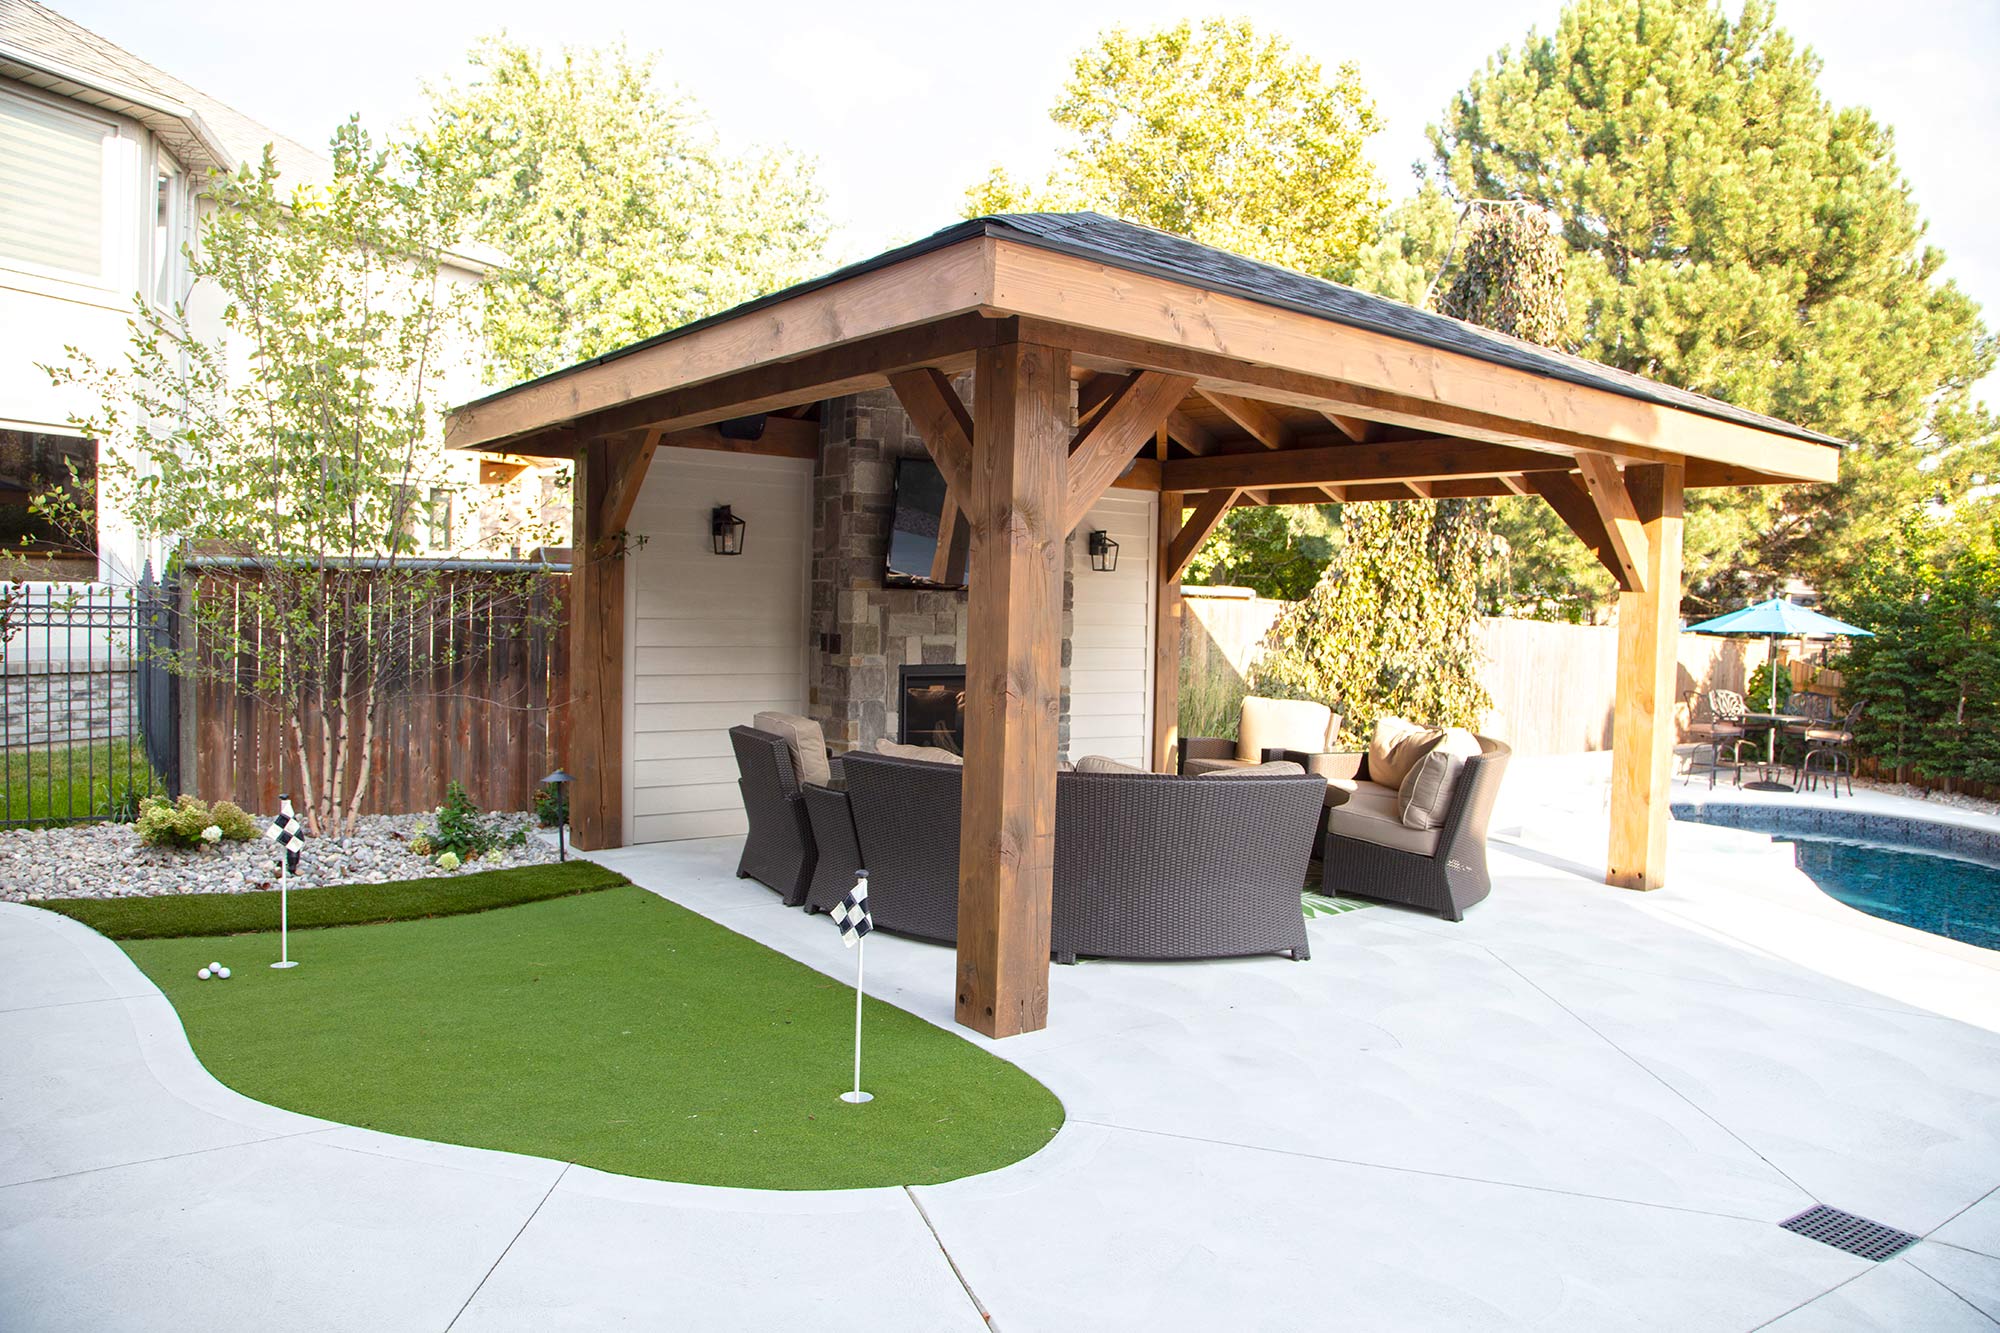 Outdoor gazebo and small golf putting area, alternate angle 2.